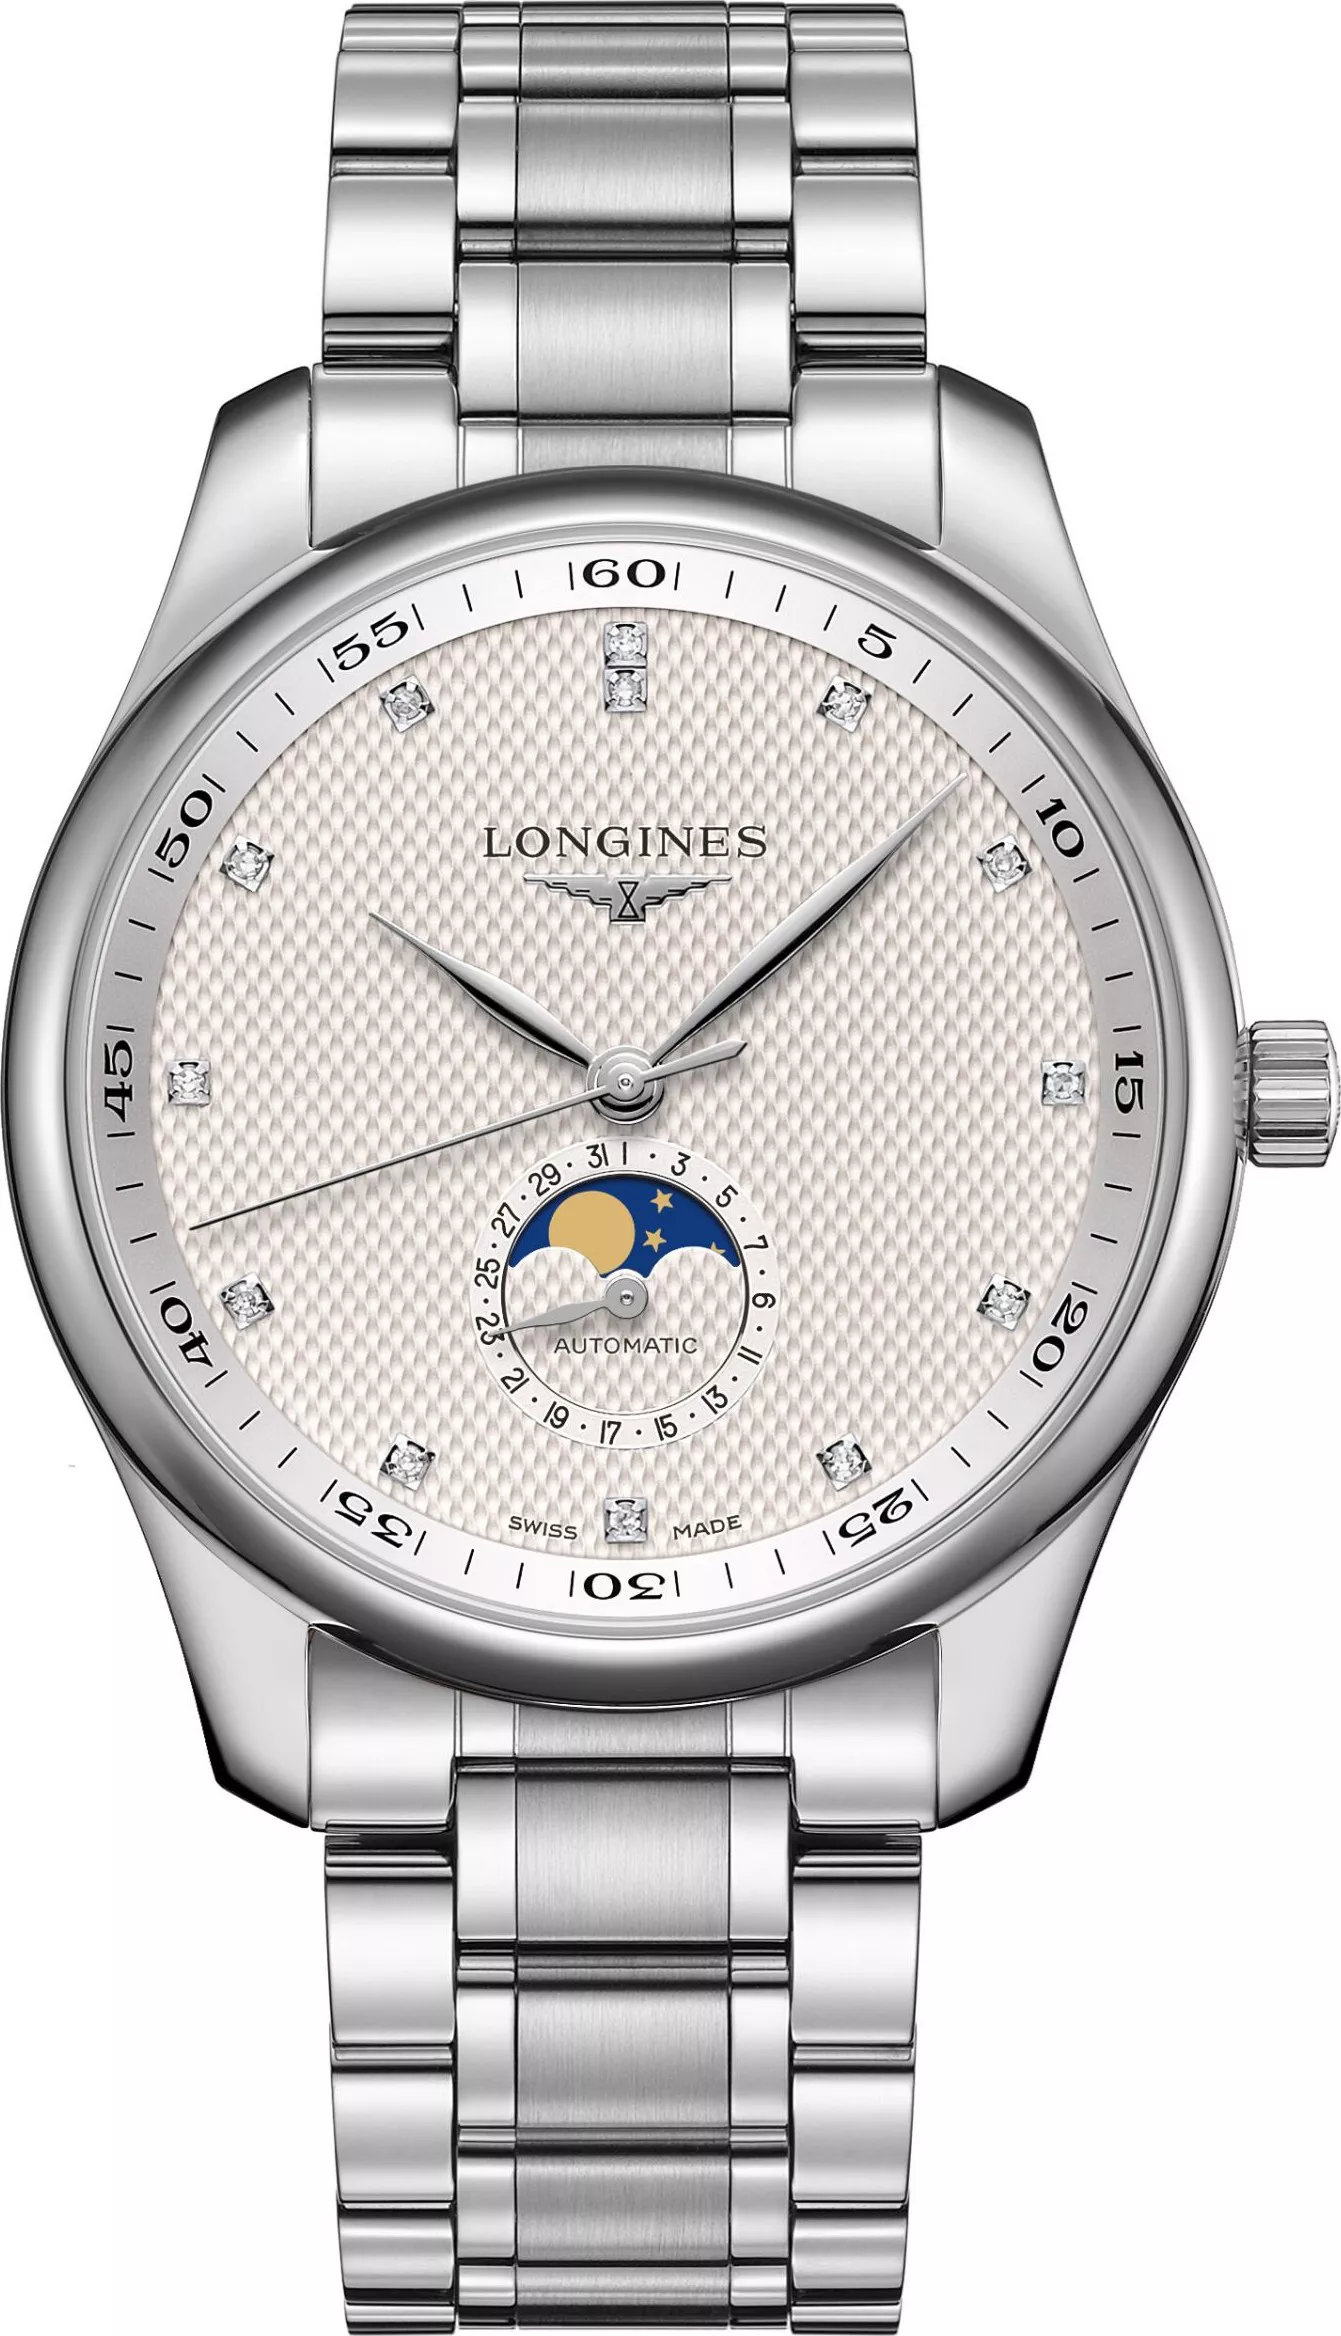 MSP: 94132 Longines Master L2.919.4.77.6 Collection Watch 42mm 71,960,000